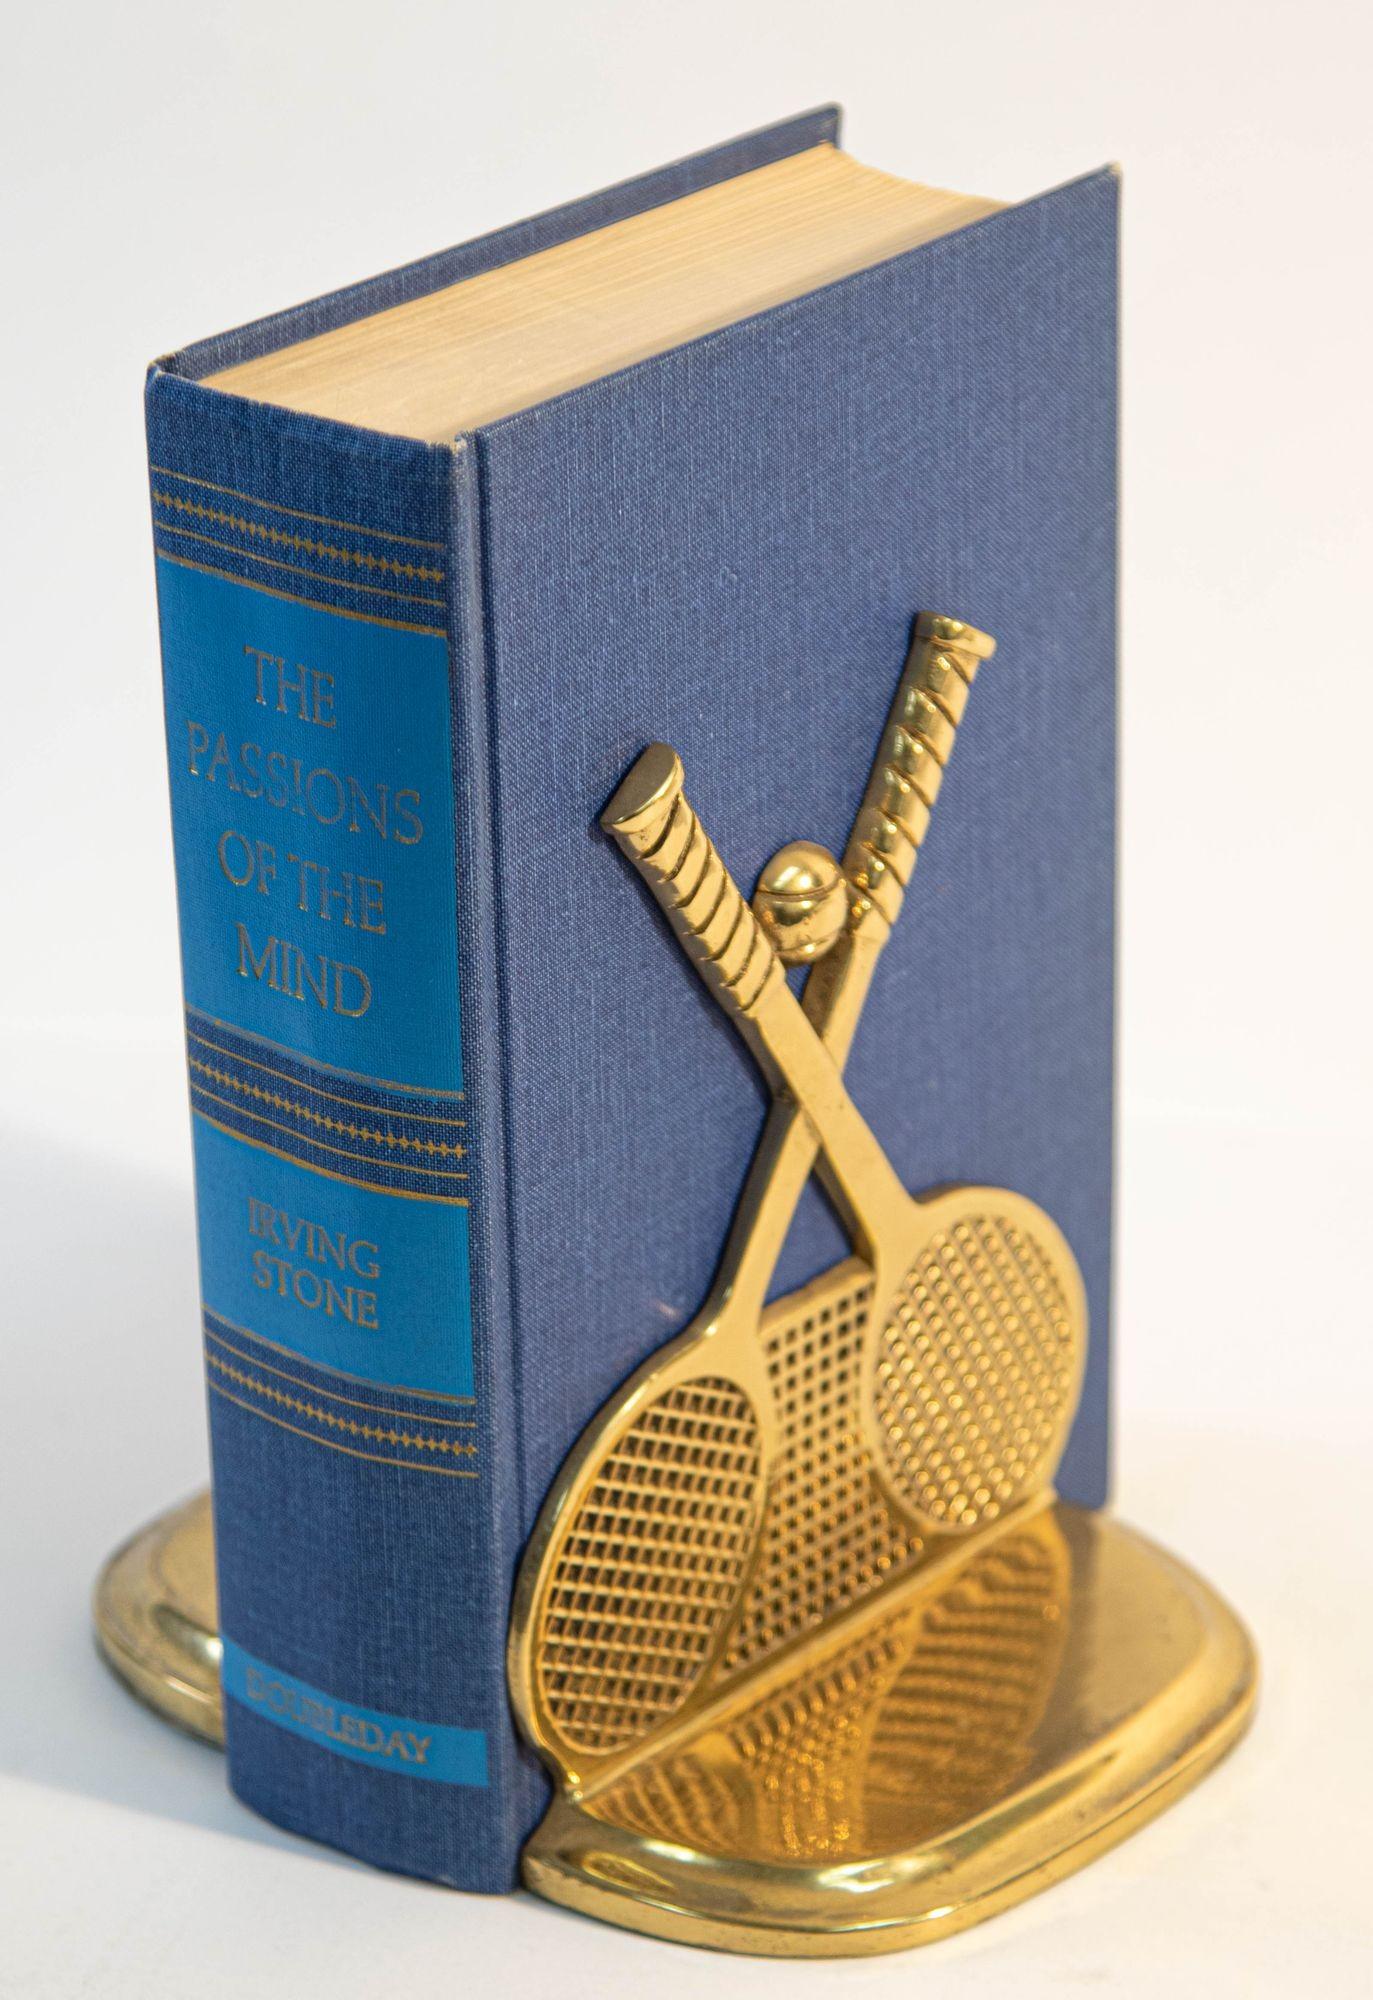 Pair of Vintage Brass Tennis Racket and Ball Bookends.
This pair of vintage cast brass bookends feature a tennis racquet sculptures on each with a ball in front of a tennis net.
Vintage from the late 70's these brass tennis racket and ball